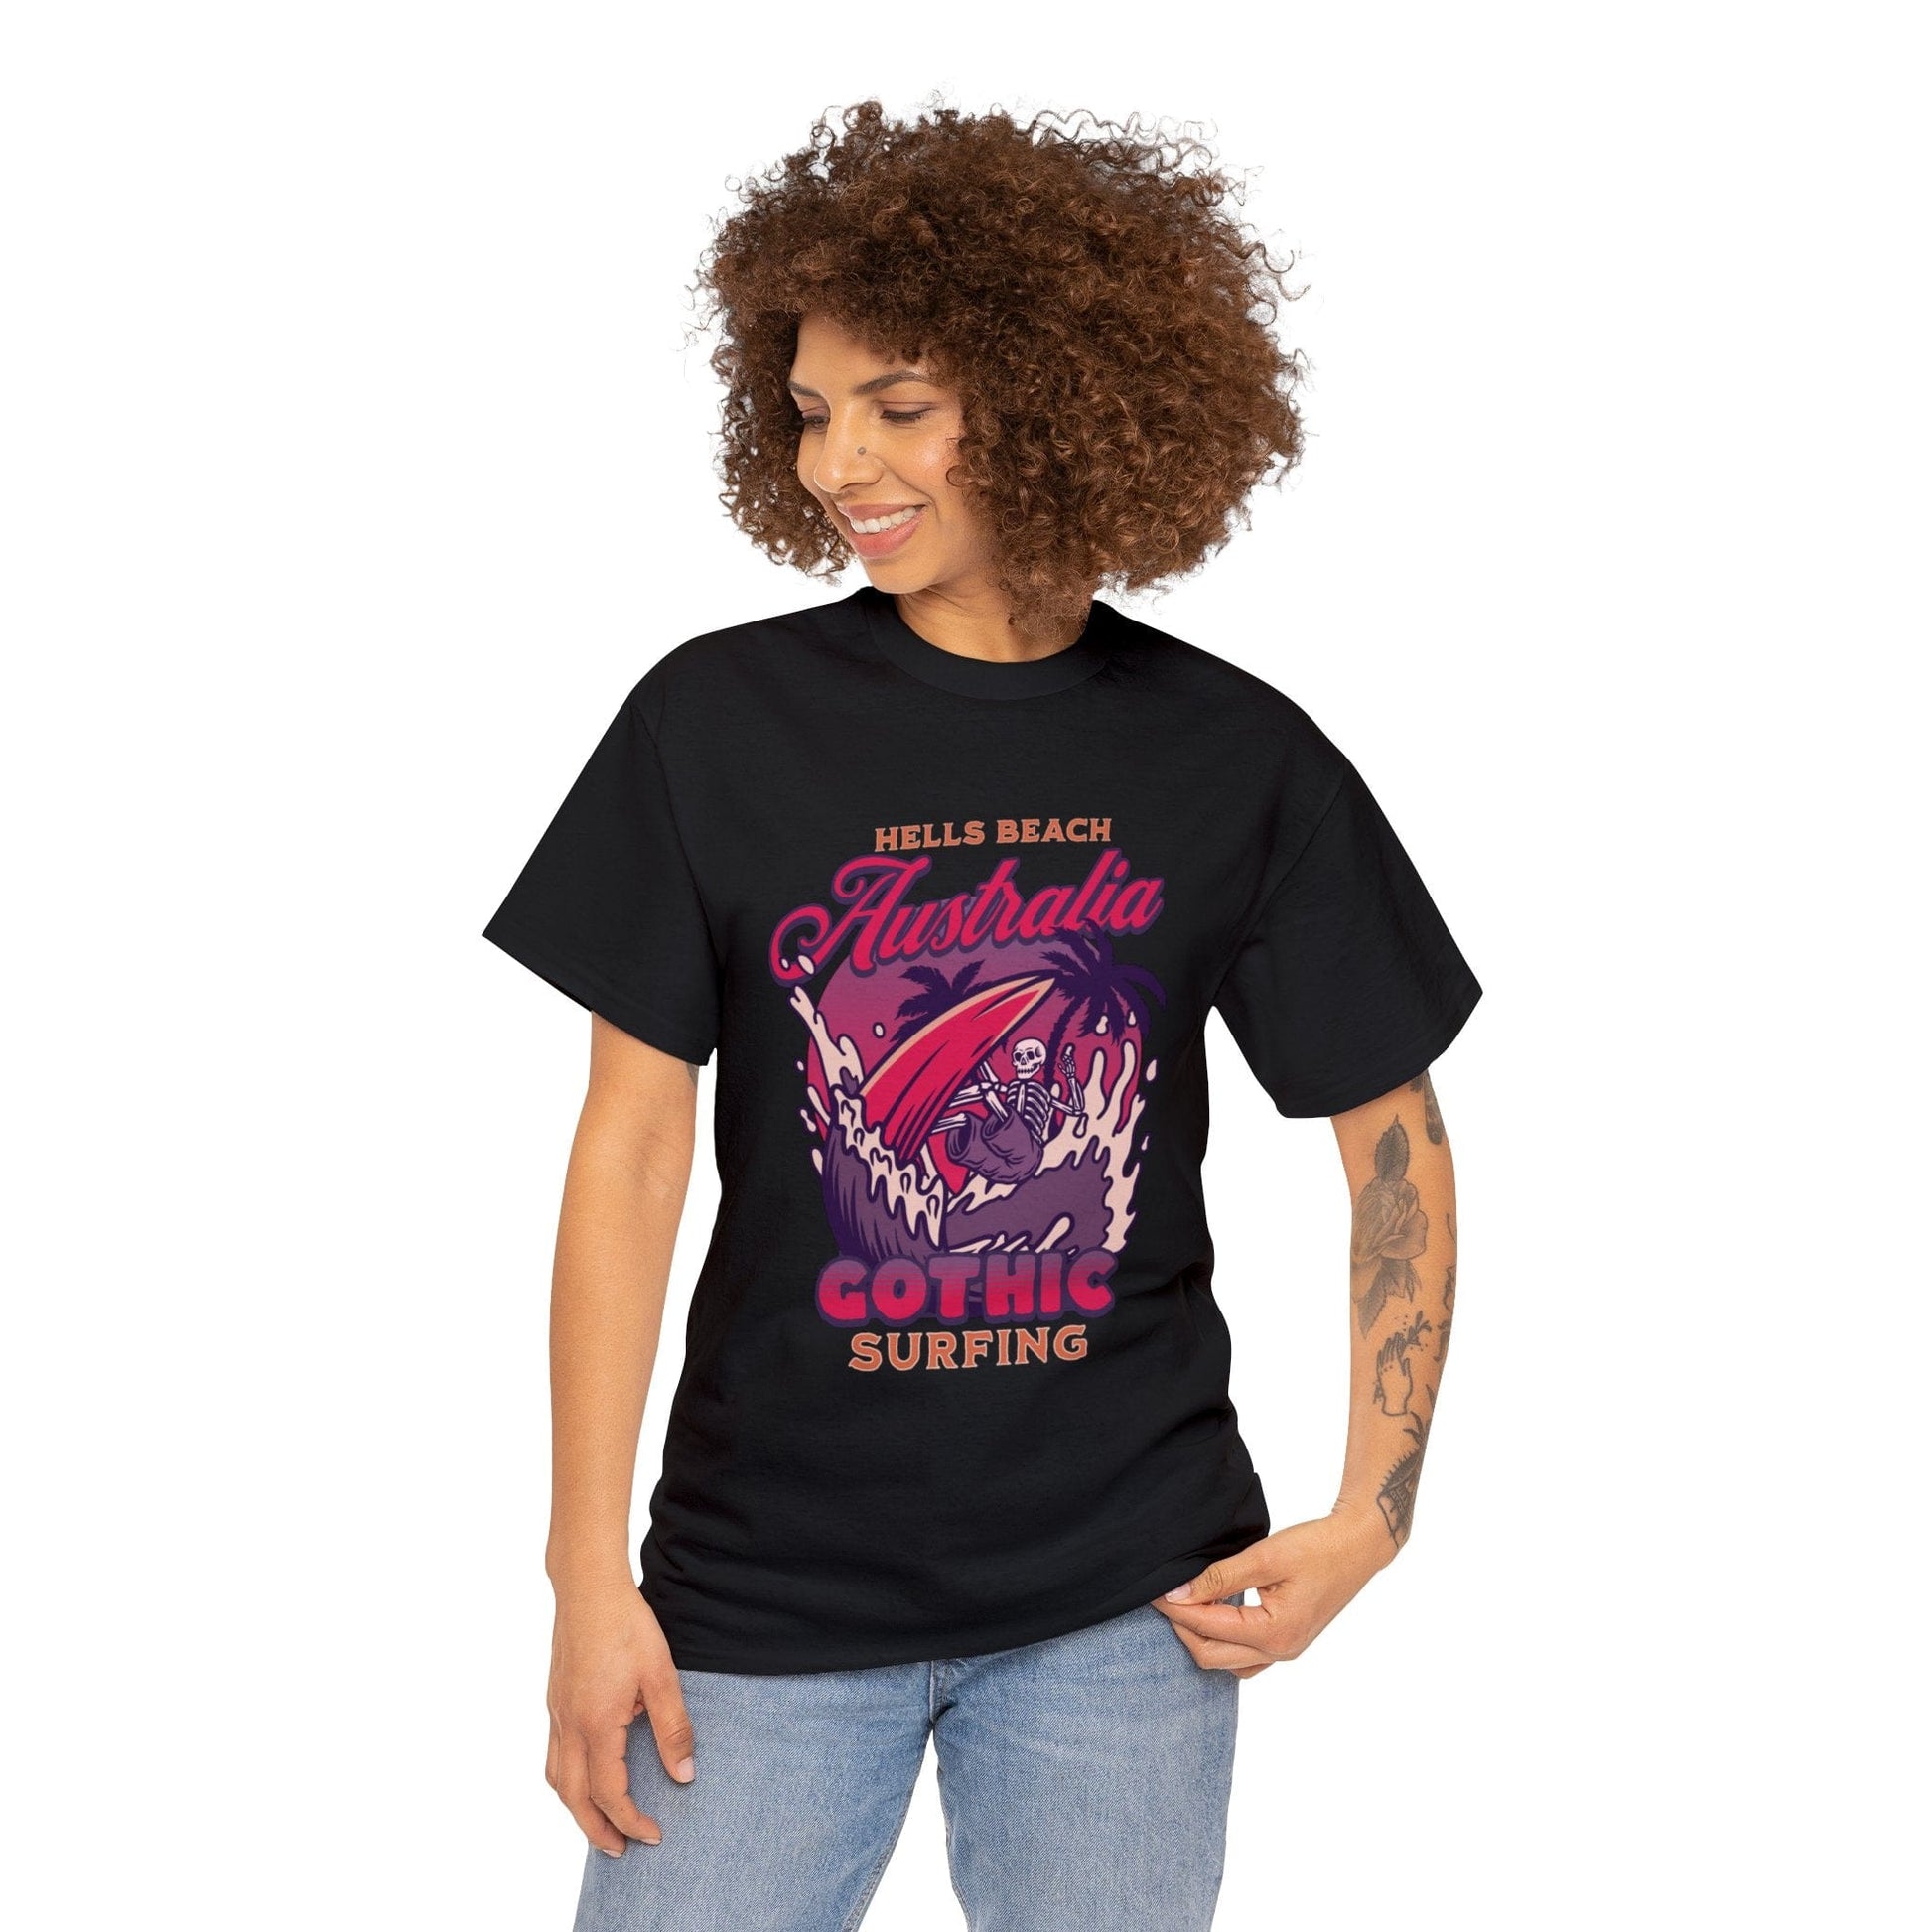 alternative mum who used to go goth clubbing wearing the women's Hells Beach Australia Gothic Surfing black Gildan 5000 t-shirt in reds, purples, halloween oranges featuring a board short wearing skeleton catching a wave under a full moon